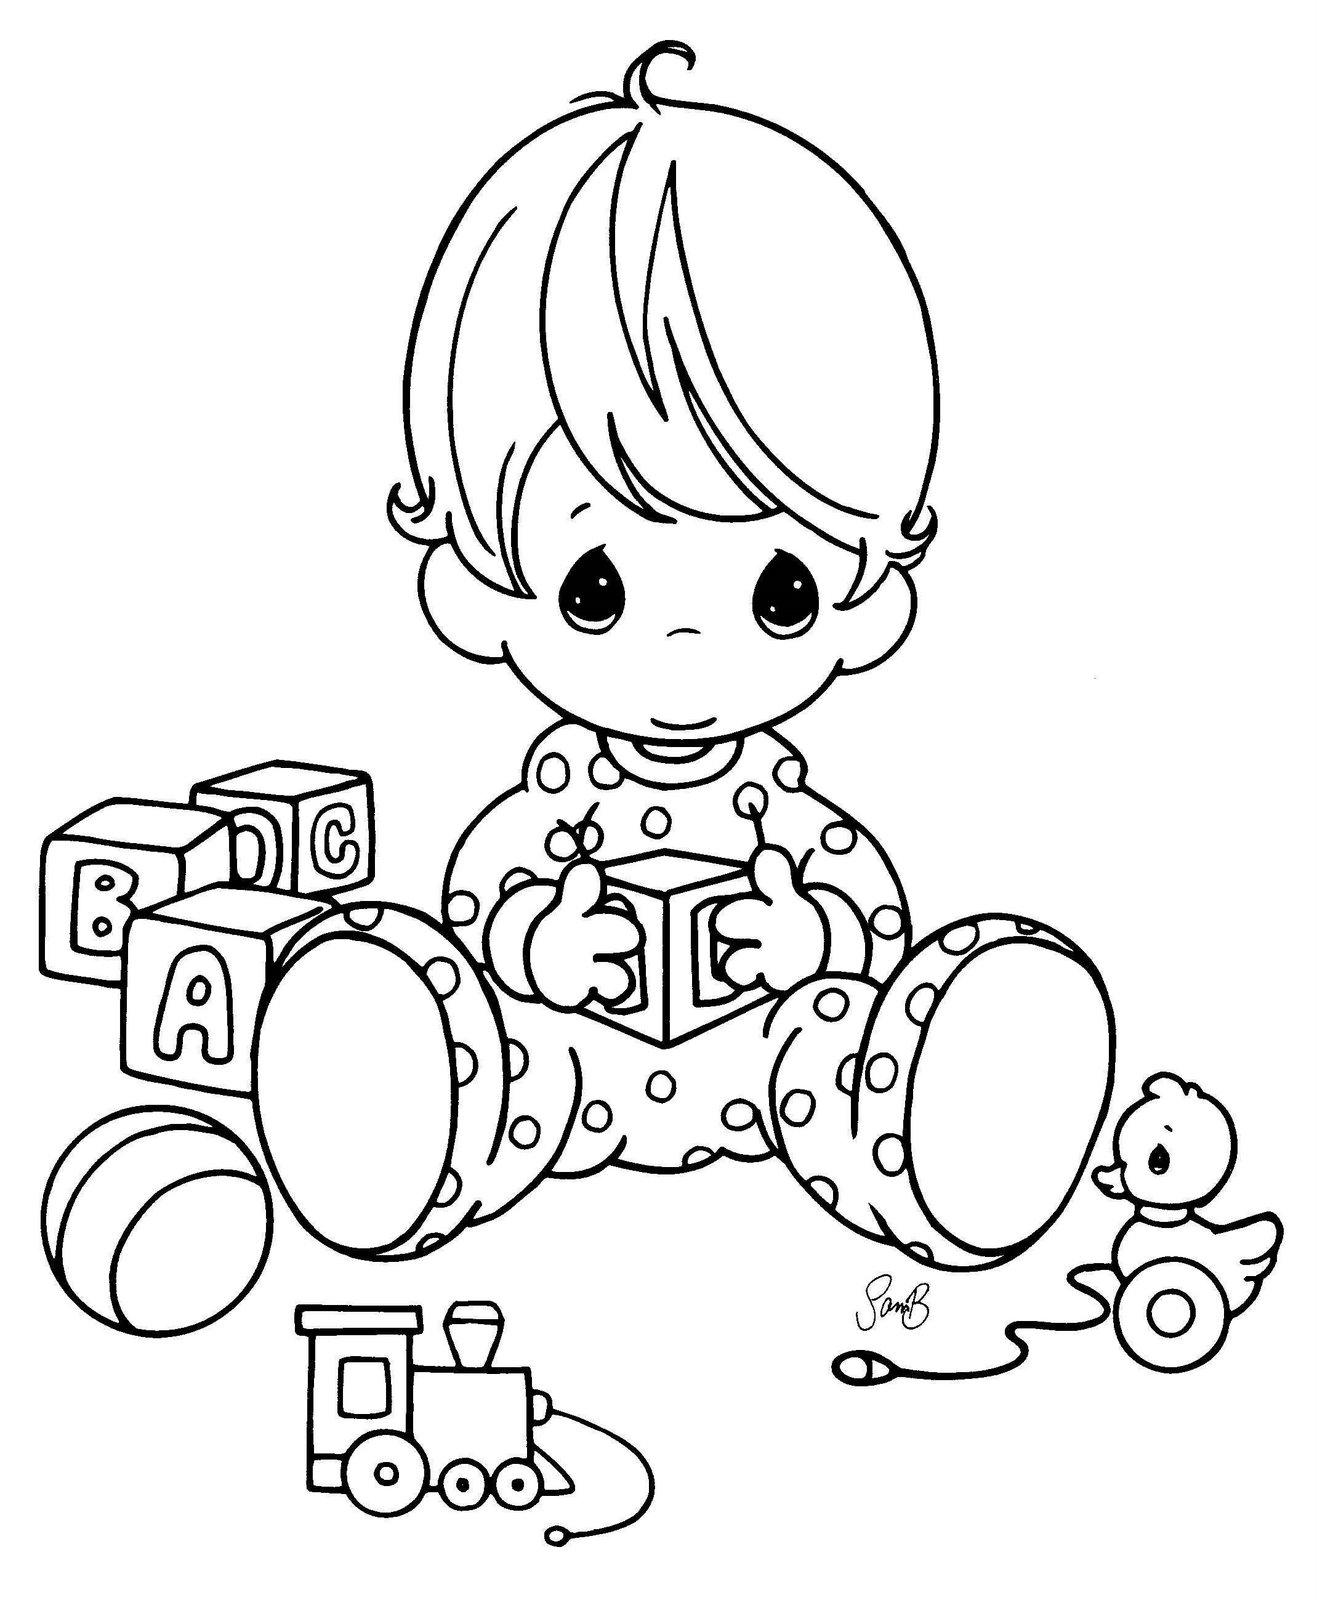 Baby Birthday Coloring Pages - Coloring Pages For All Ages